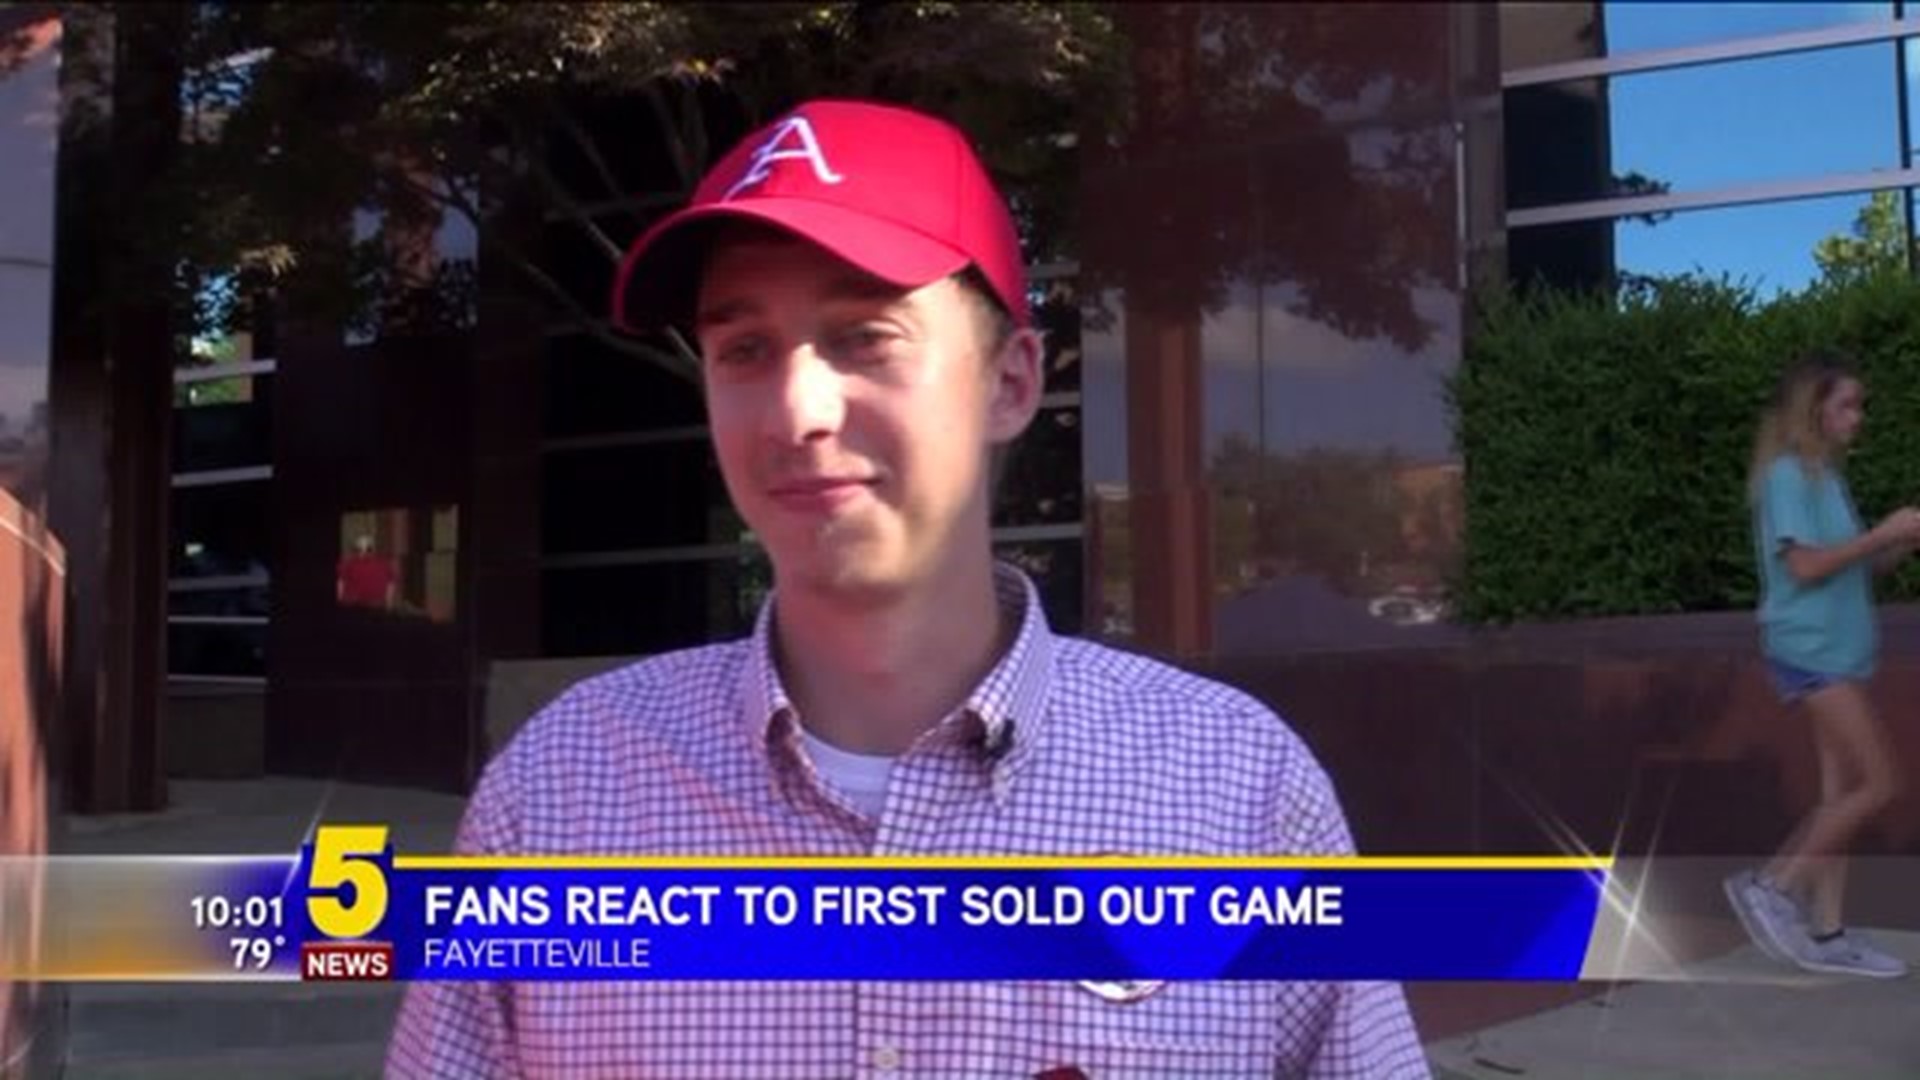 Fans React To First Sold Out Game